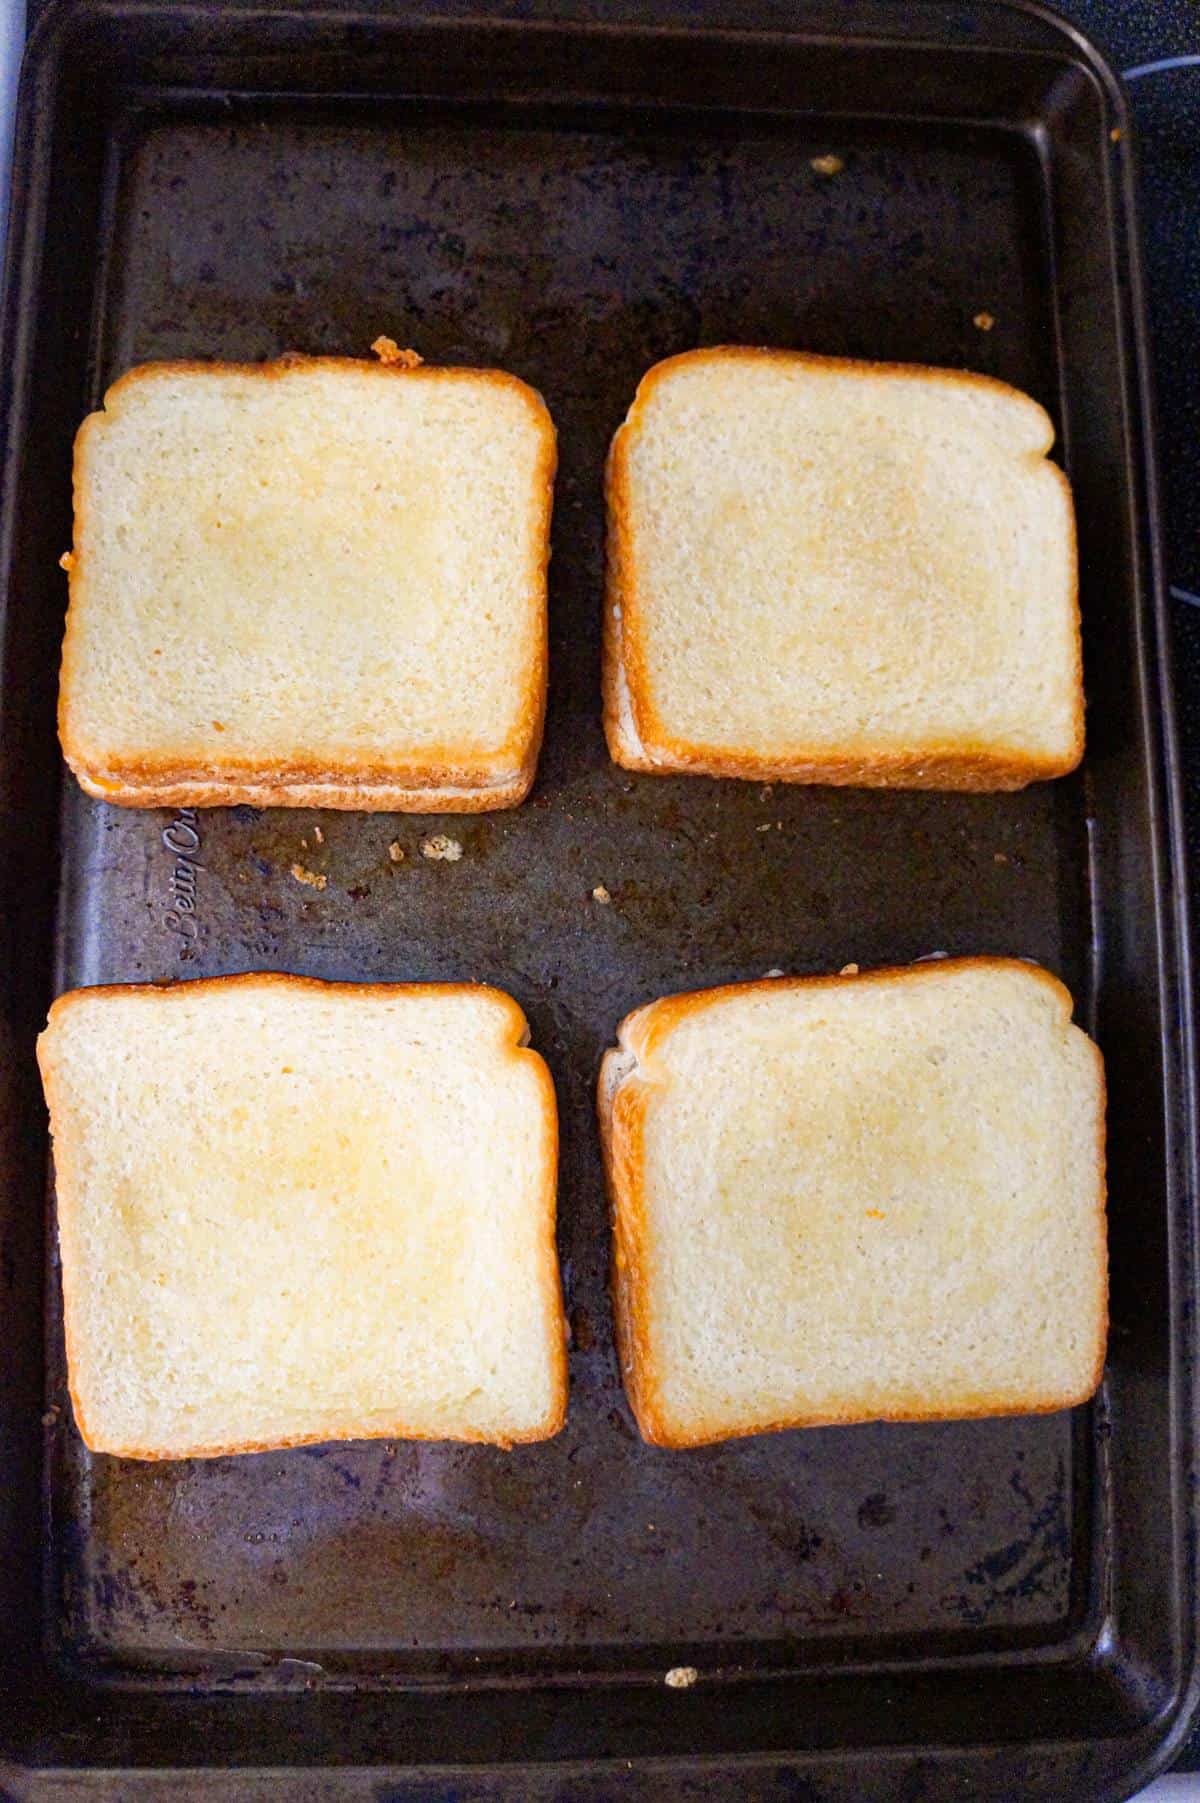 grilled cheese sandwiches on a baking sheet